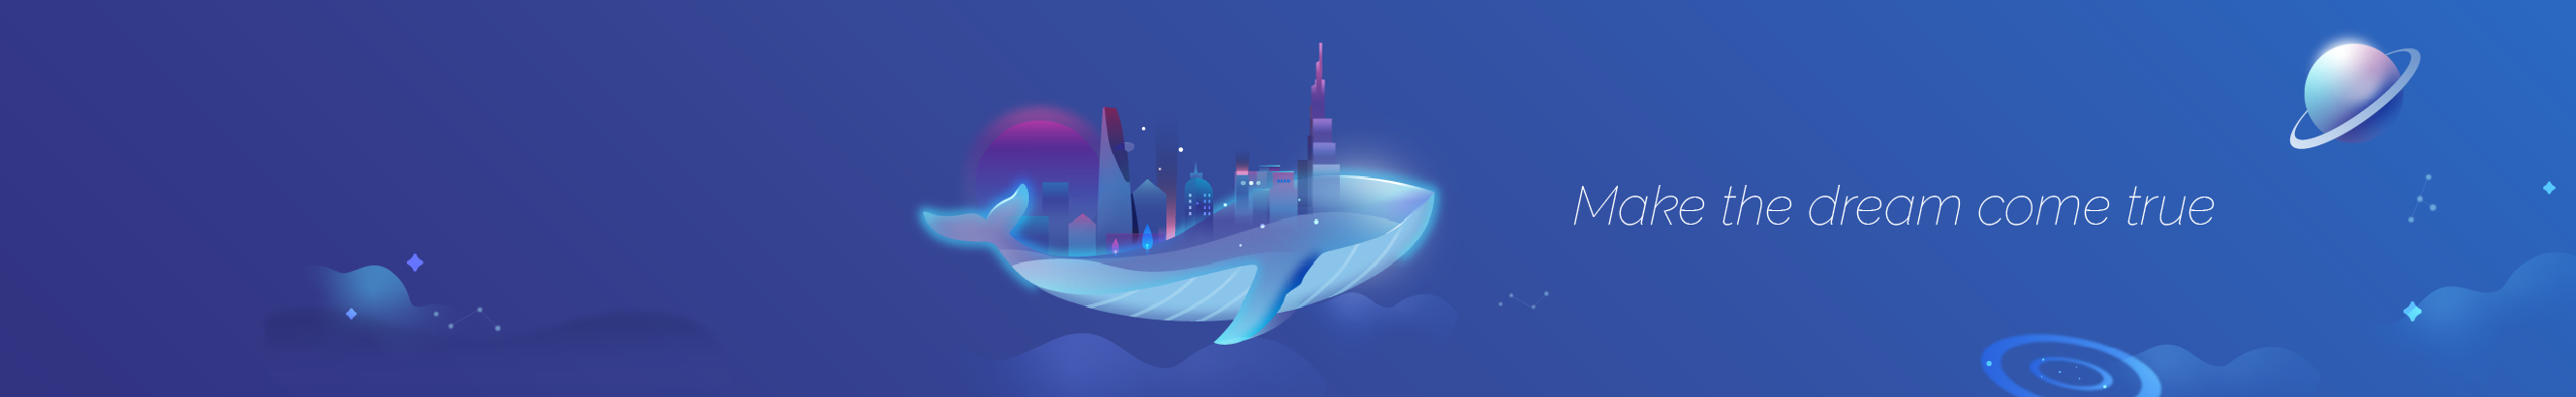 Flying Whales's profile banner